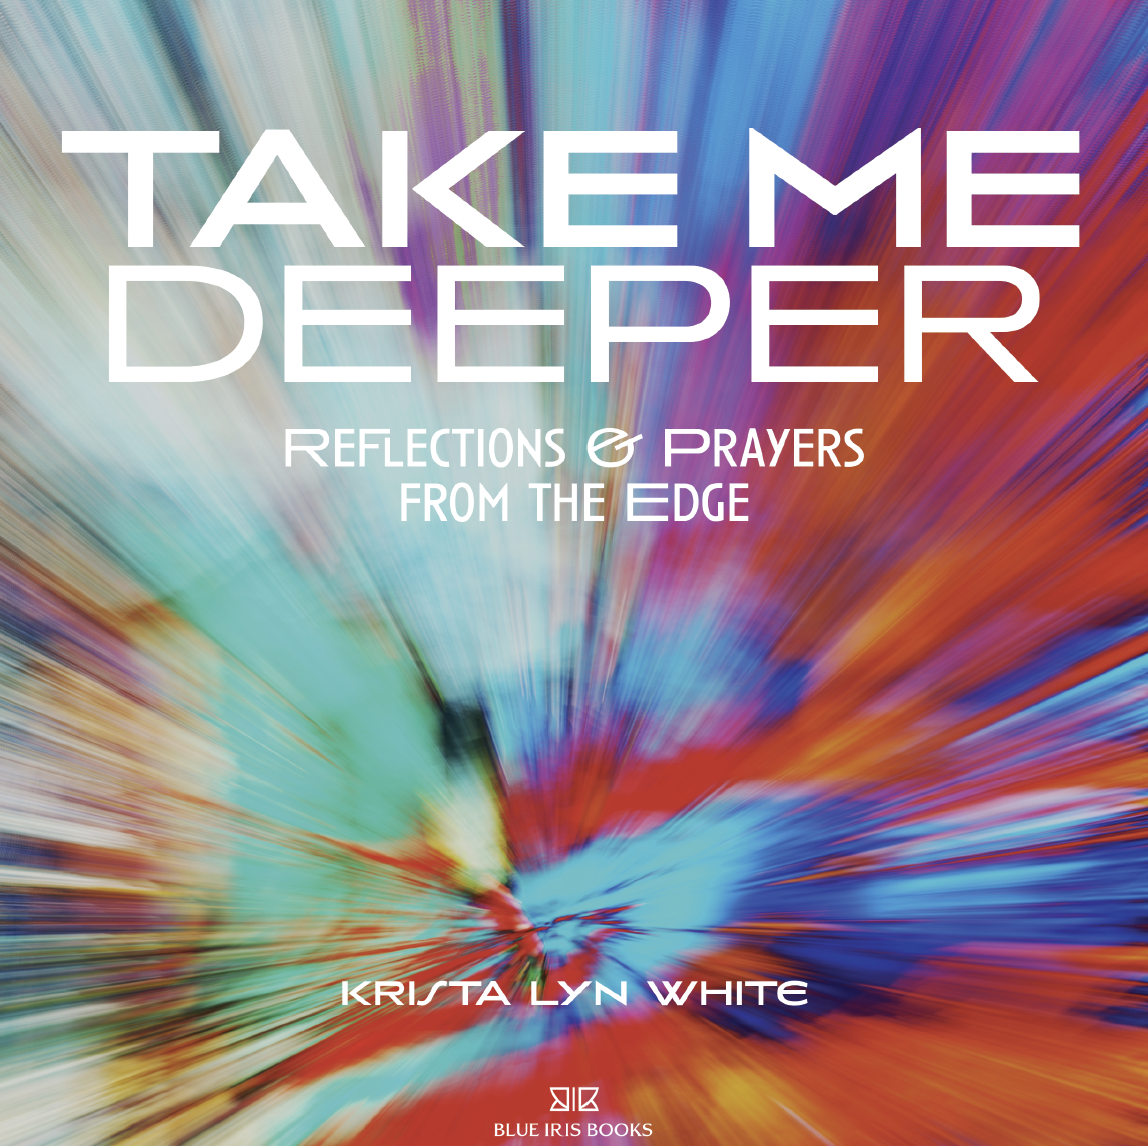 Take Me Deeper: Reflections and Prayers from the Edge by Krista Lyn White